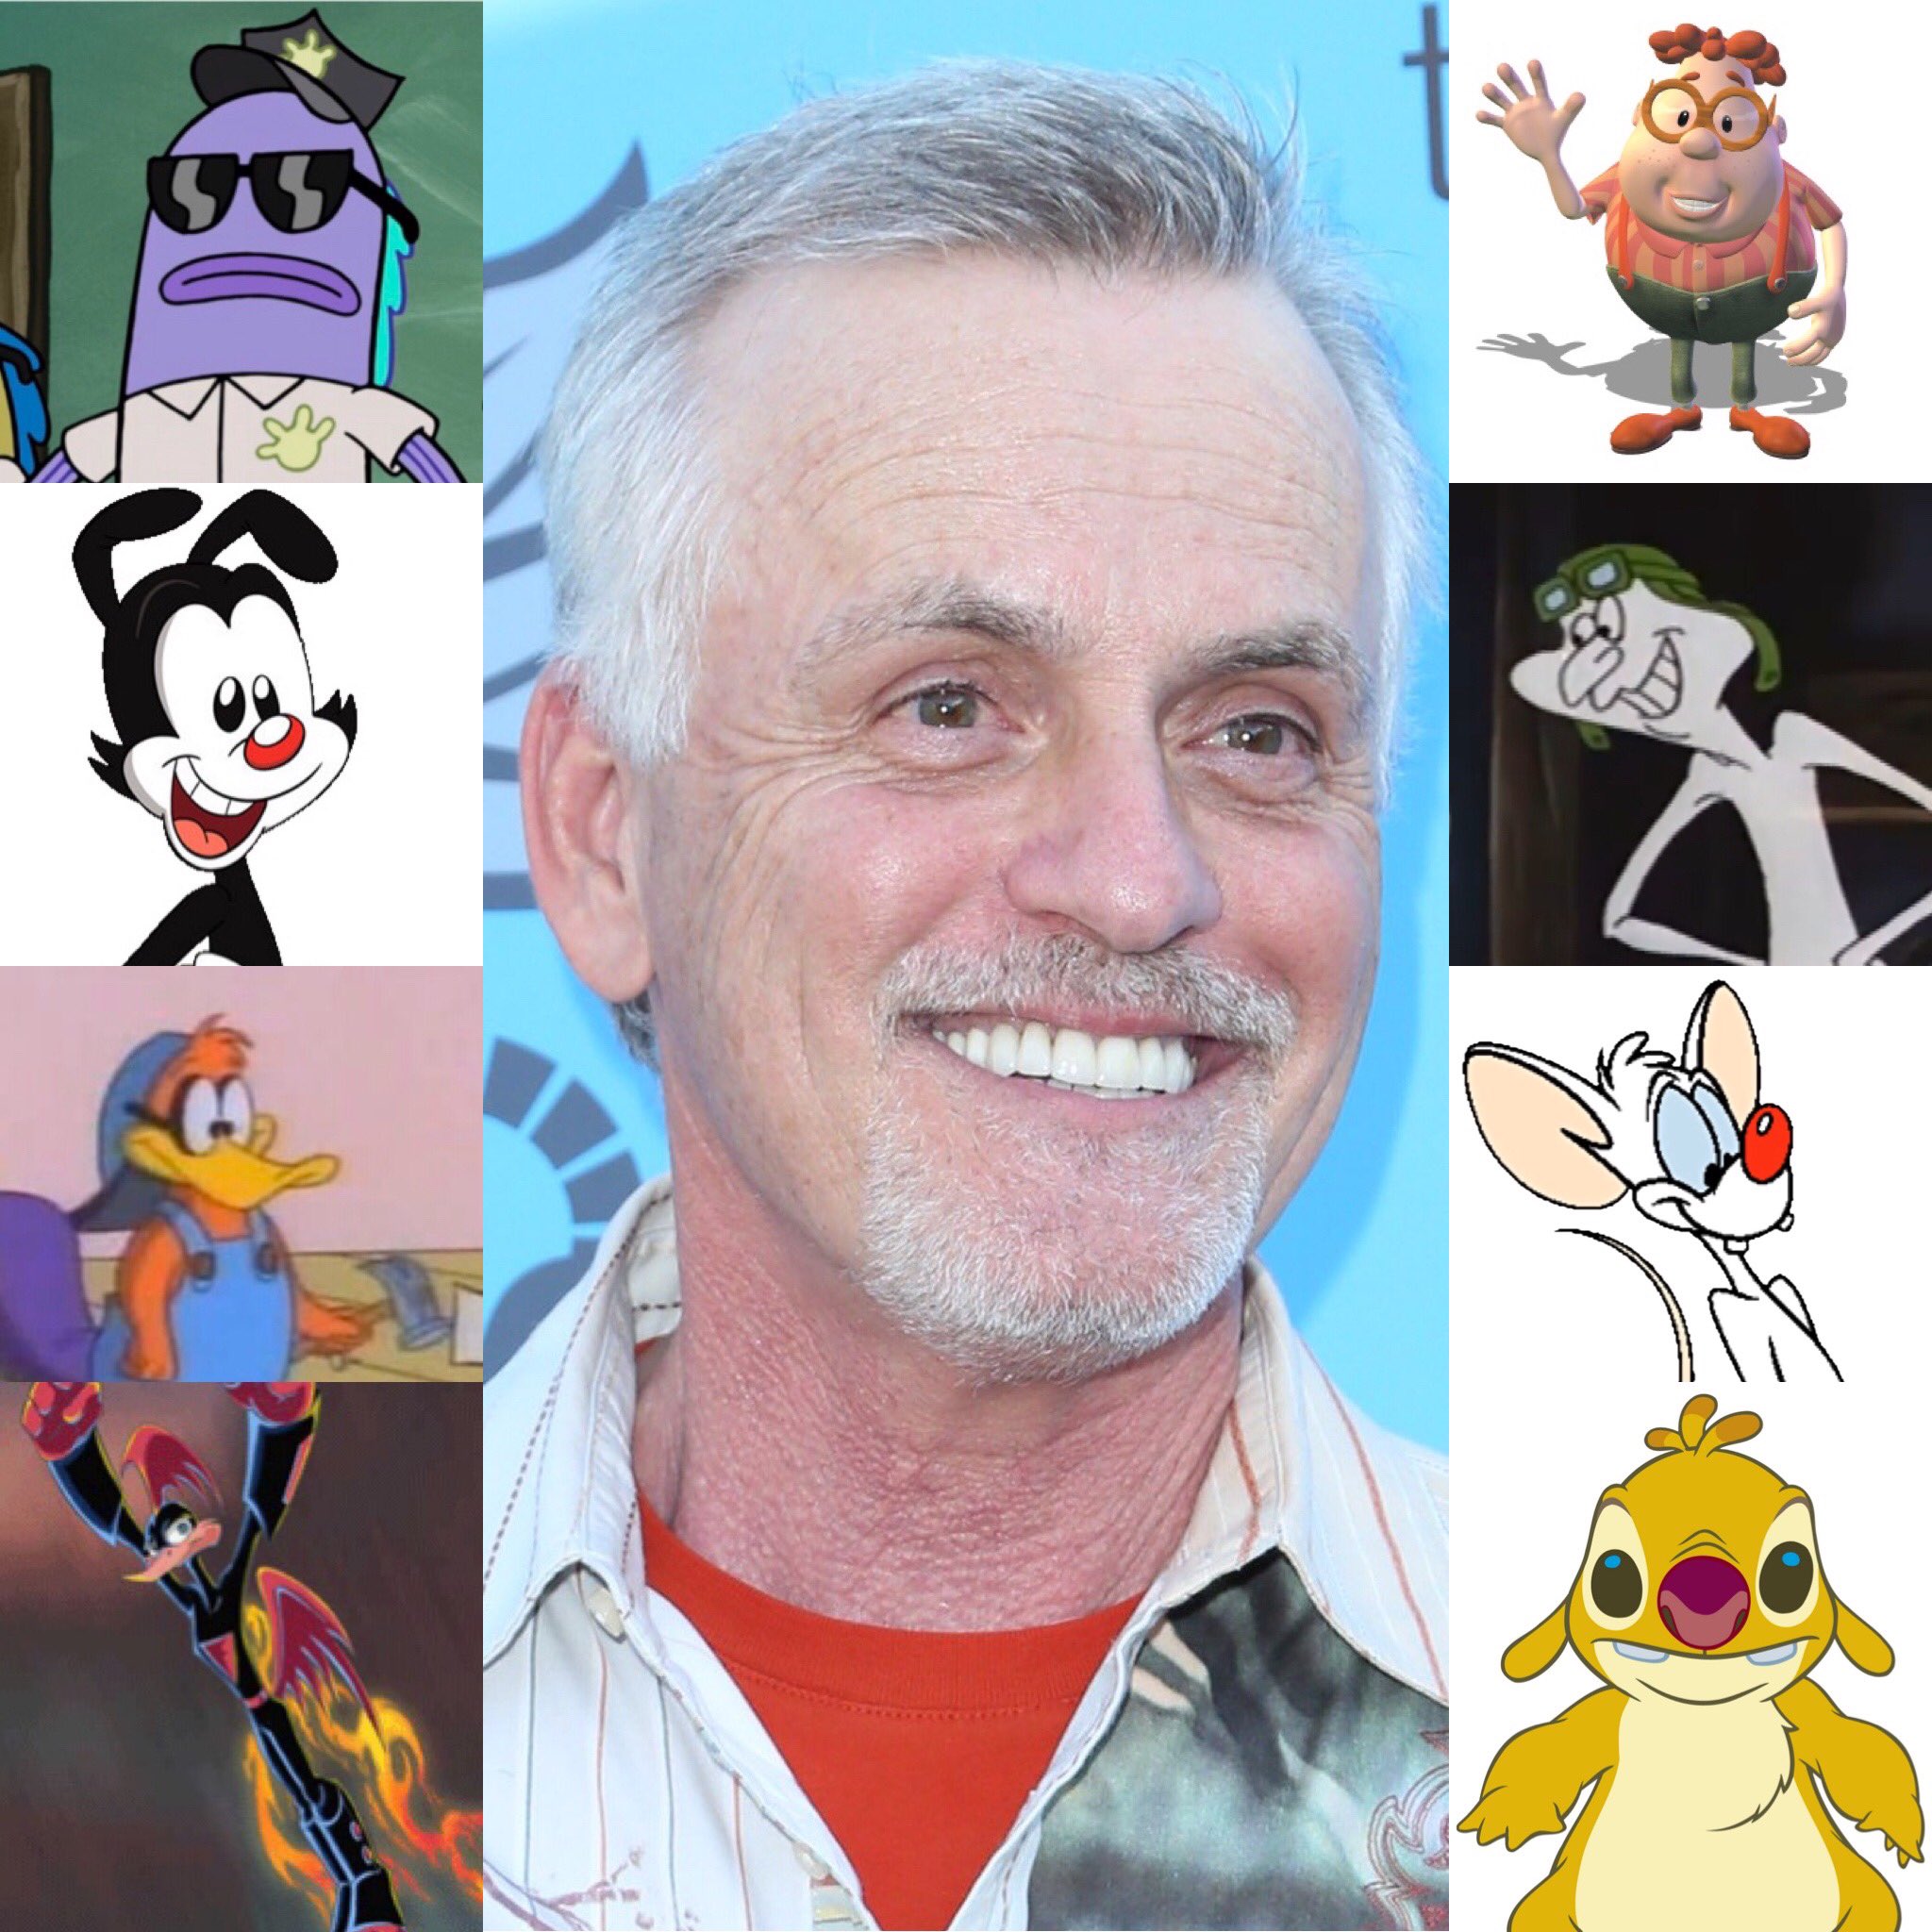 Happy birthday to my favorite childhood voice actor, The Legendary Rob Paulsen! Hope you have an amazing birthday! 